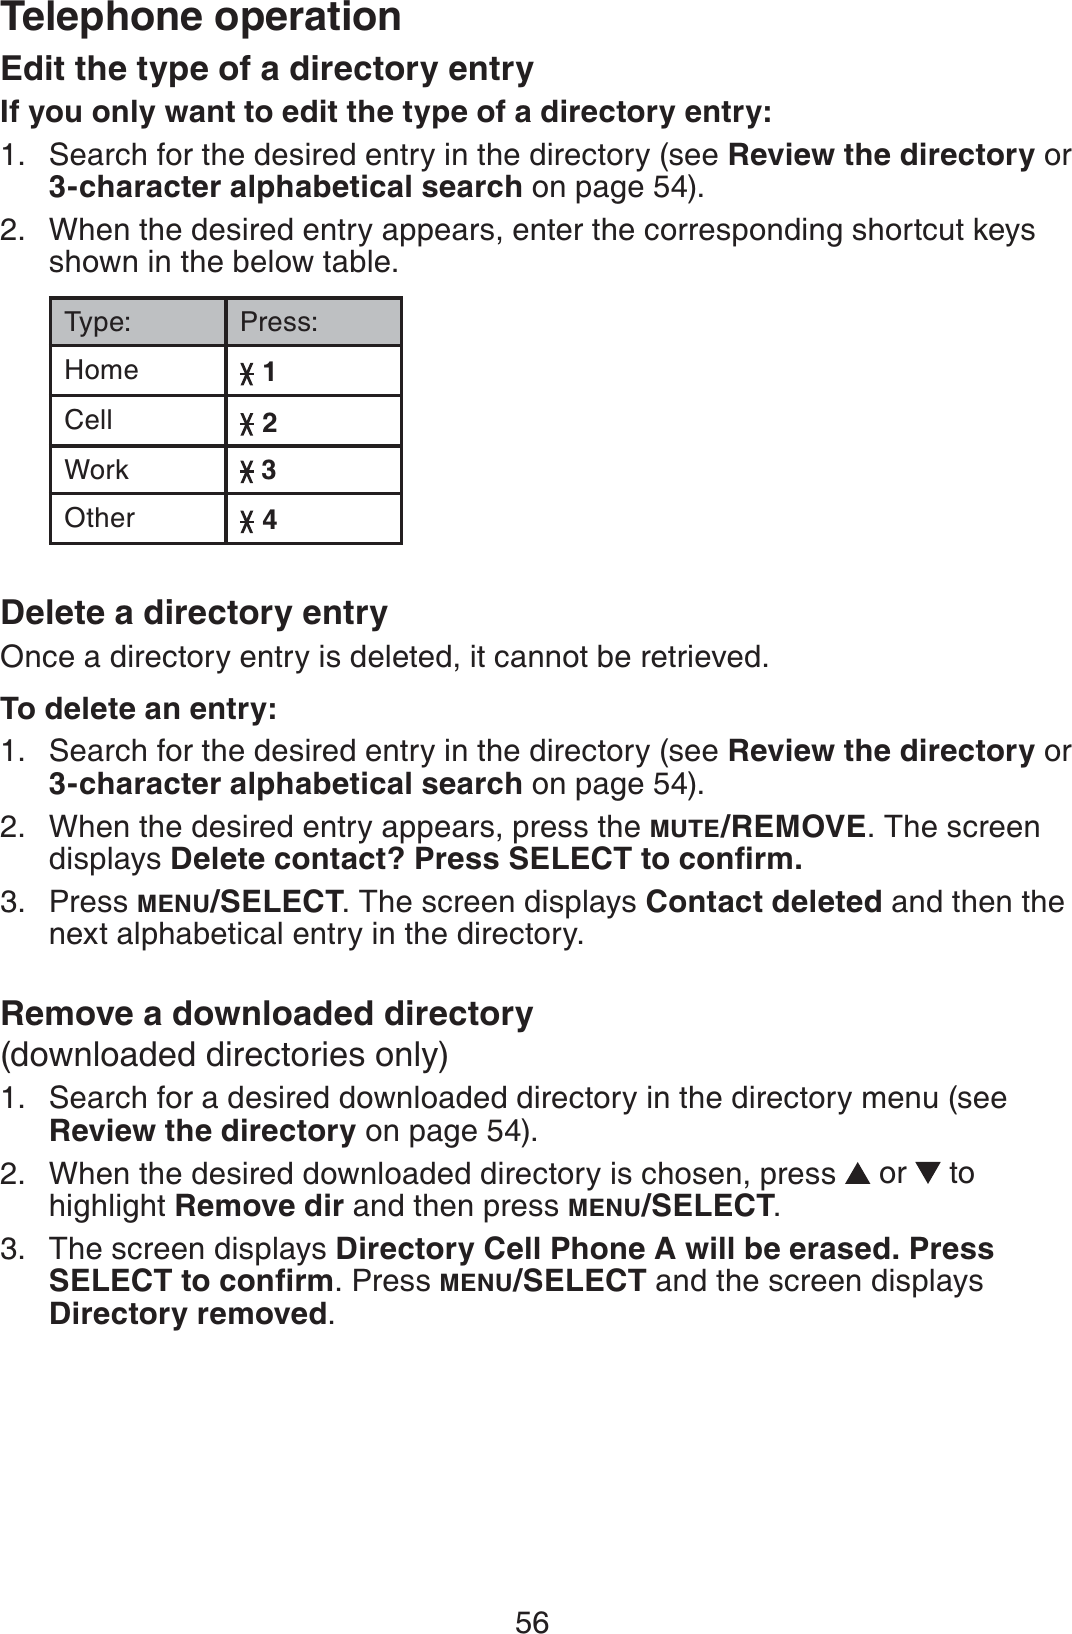 56Telephone operationEdit the type of a directory entryIf you only want to edit the type of a directory entry:Search for the desired entry in the directory (see Review the directory or 3-character alphabetical search on page 54).When the desired entry appears, enter the corresponding shortcut keys shown in the below table.Type: Press:Home 1Cell 2Work  3Other 4Delete a directory entryOnce a directory entry is deleted, it cannot be retrieved.To delete an entry:Search for the desired entry in the directory (see Review the directory or 3-character alphabetical search on page 54).When the desired entry appears, press the MUTE/REMOVE. The screen displays &amp;GNGVGEQPVCEV!2TGUU5&apos;.&apos;%6VQEQPſTOPress MENU/SELECT. The screen displays Contact deleted and then the next alphabetical entry in the directory.Remove a downloaded directory(downloaded directories only)Search for a desired downloaded directory in the directory menu (see Review the directory on page 54).When the desired downloaded directory is chosen, press  or   to highlight Remove dir and then press MENU/SELECT.The screen displays Directory Cell Phone A will be erased. Press 5&apos;.&apos;%6VQEQPſTO. Press MENU/SELECT and the screen displays Directory removed.1.2.1.2.3.1.2.3.